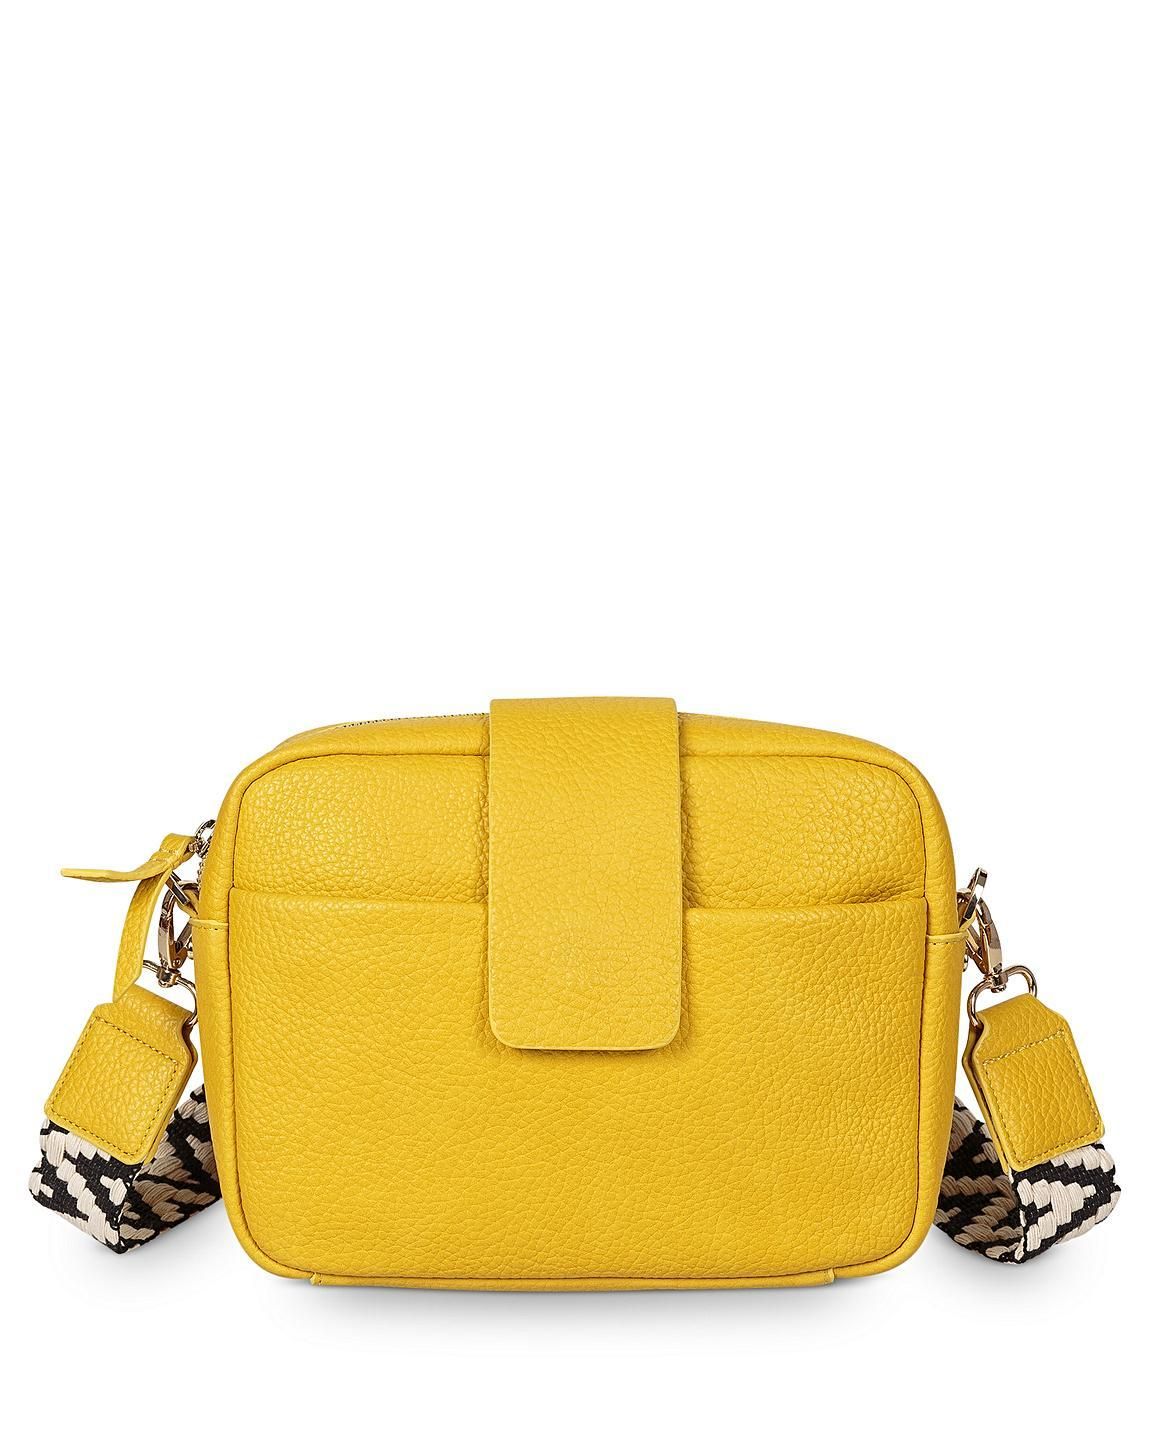 Bags | Crossbody Bags, Totes & Clutches | Oliver Bonas